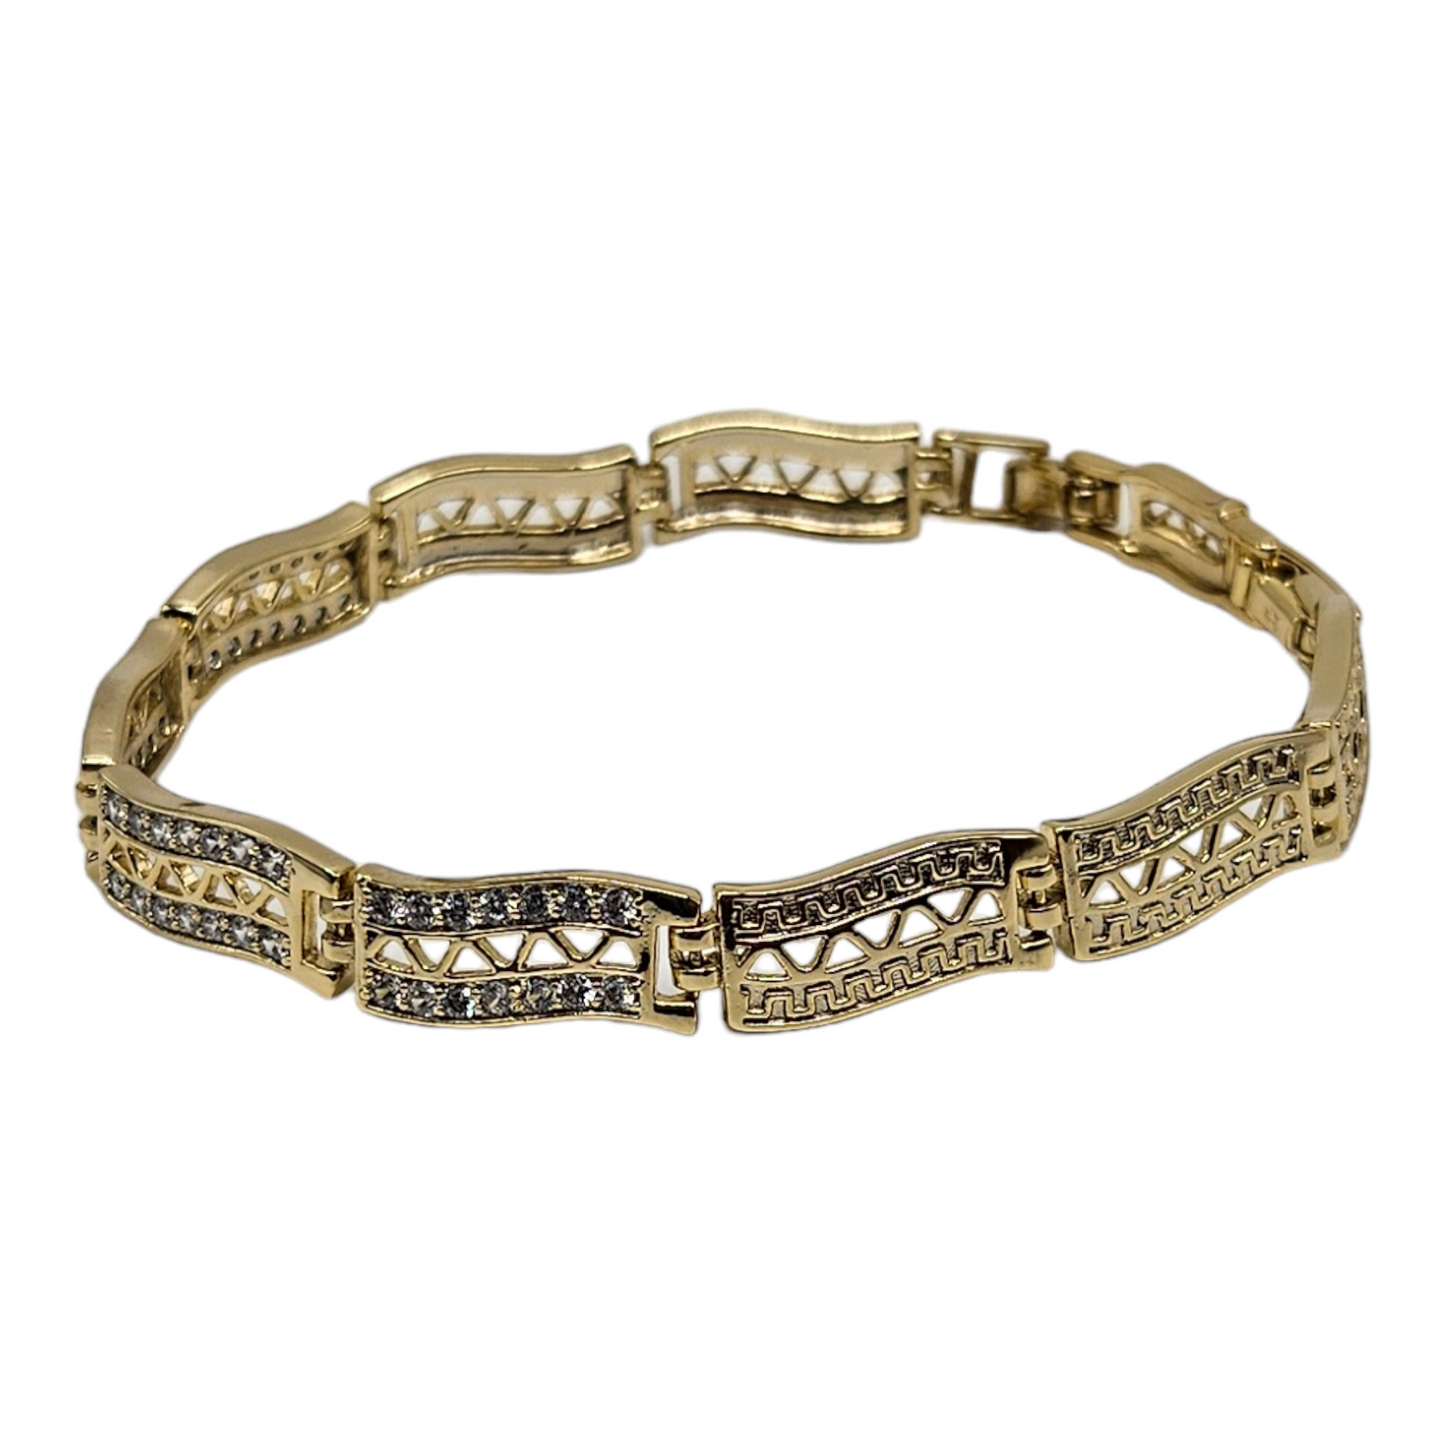 Wave Design with White CZ in 14k Gold Plated Bracelet